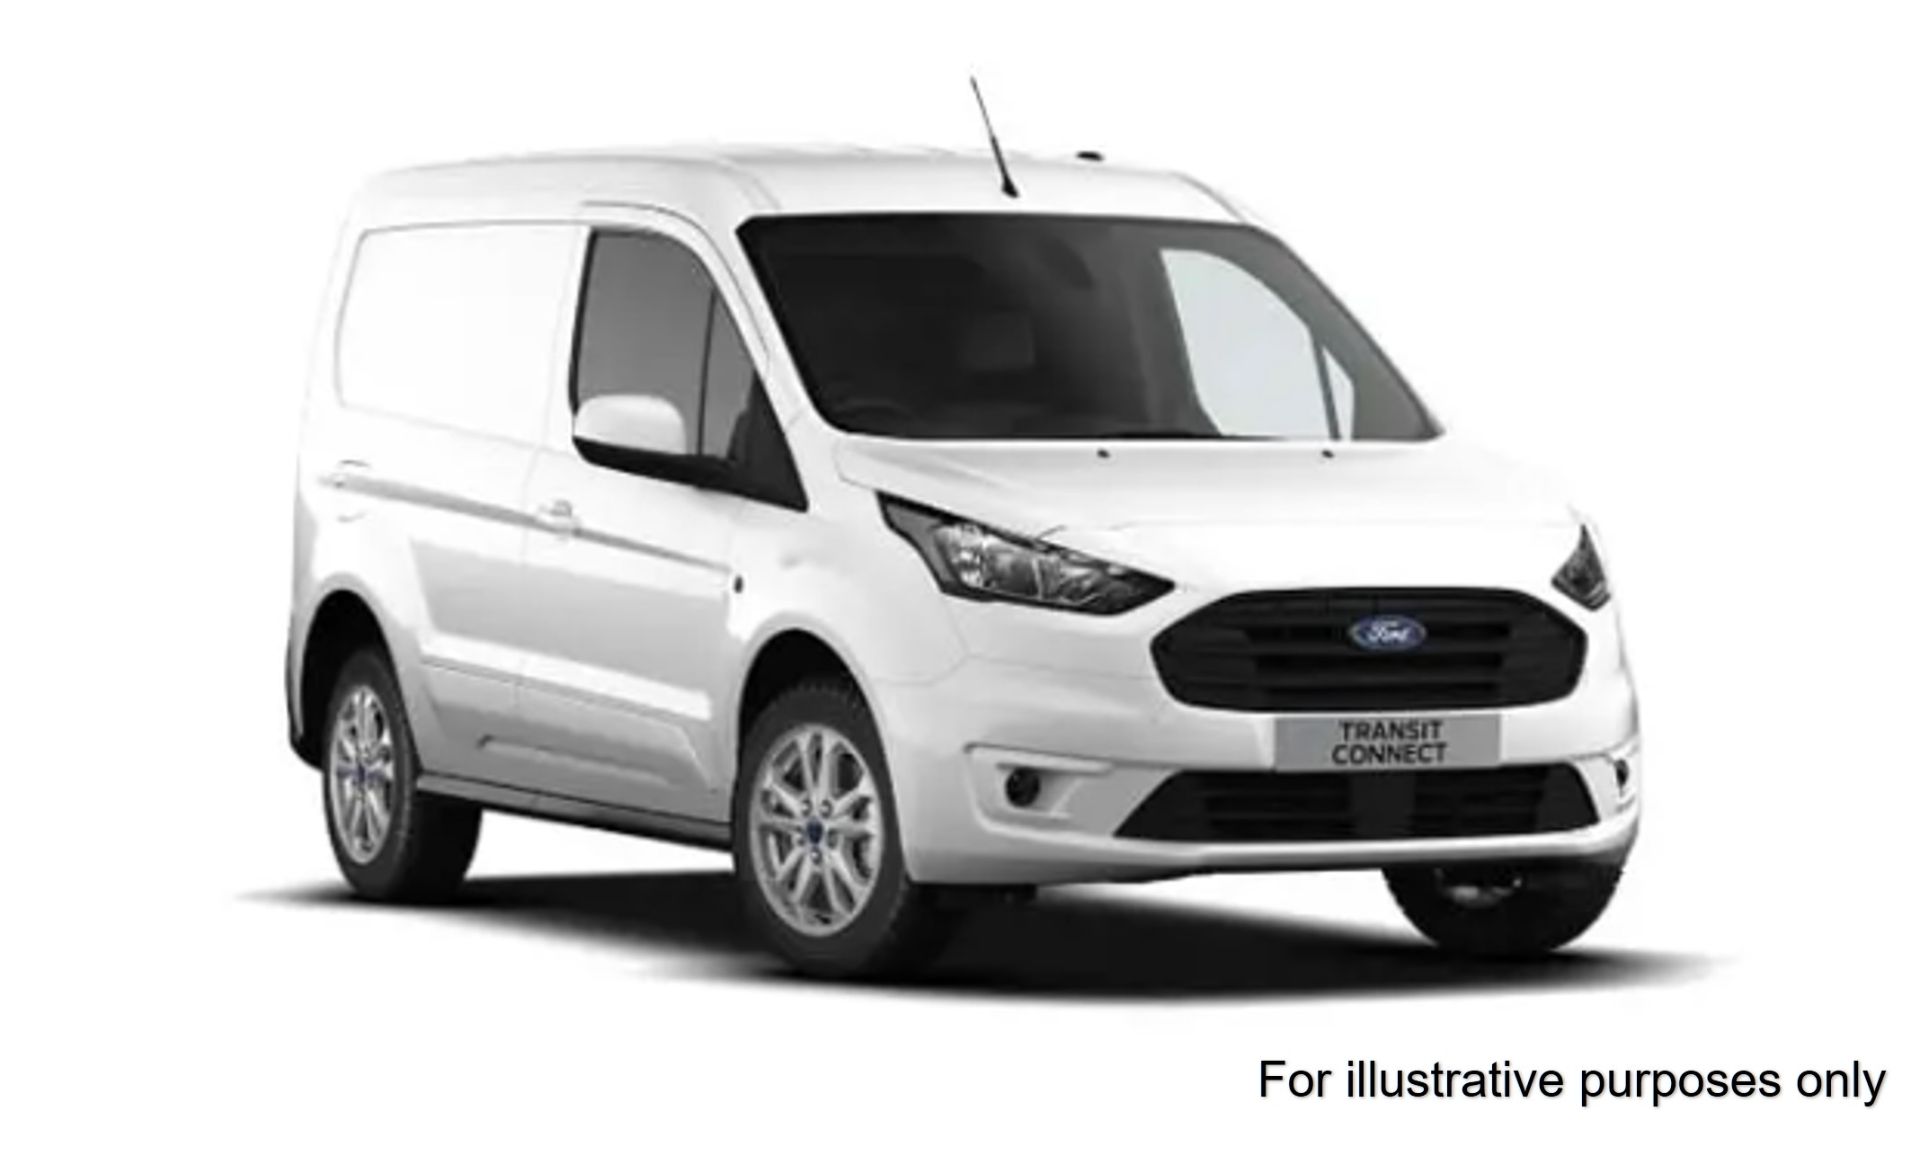 2018 Ford Transit Connect 1.5 Tdci 100Ps Van (FD18VYH)